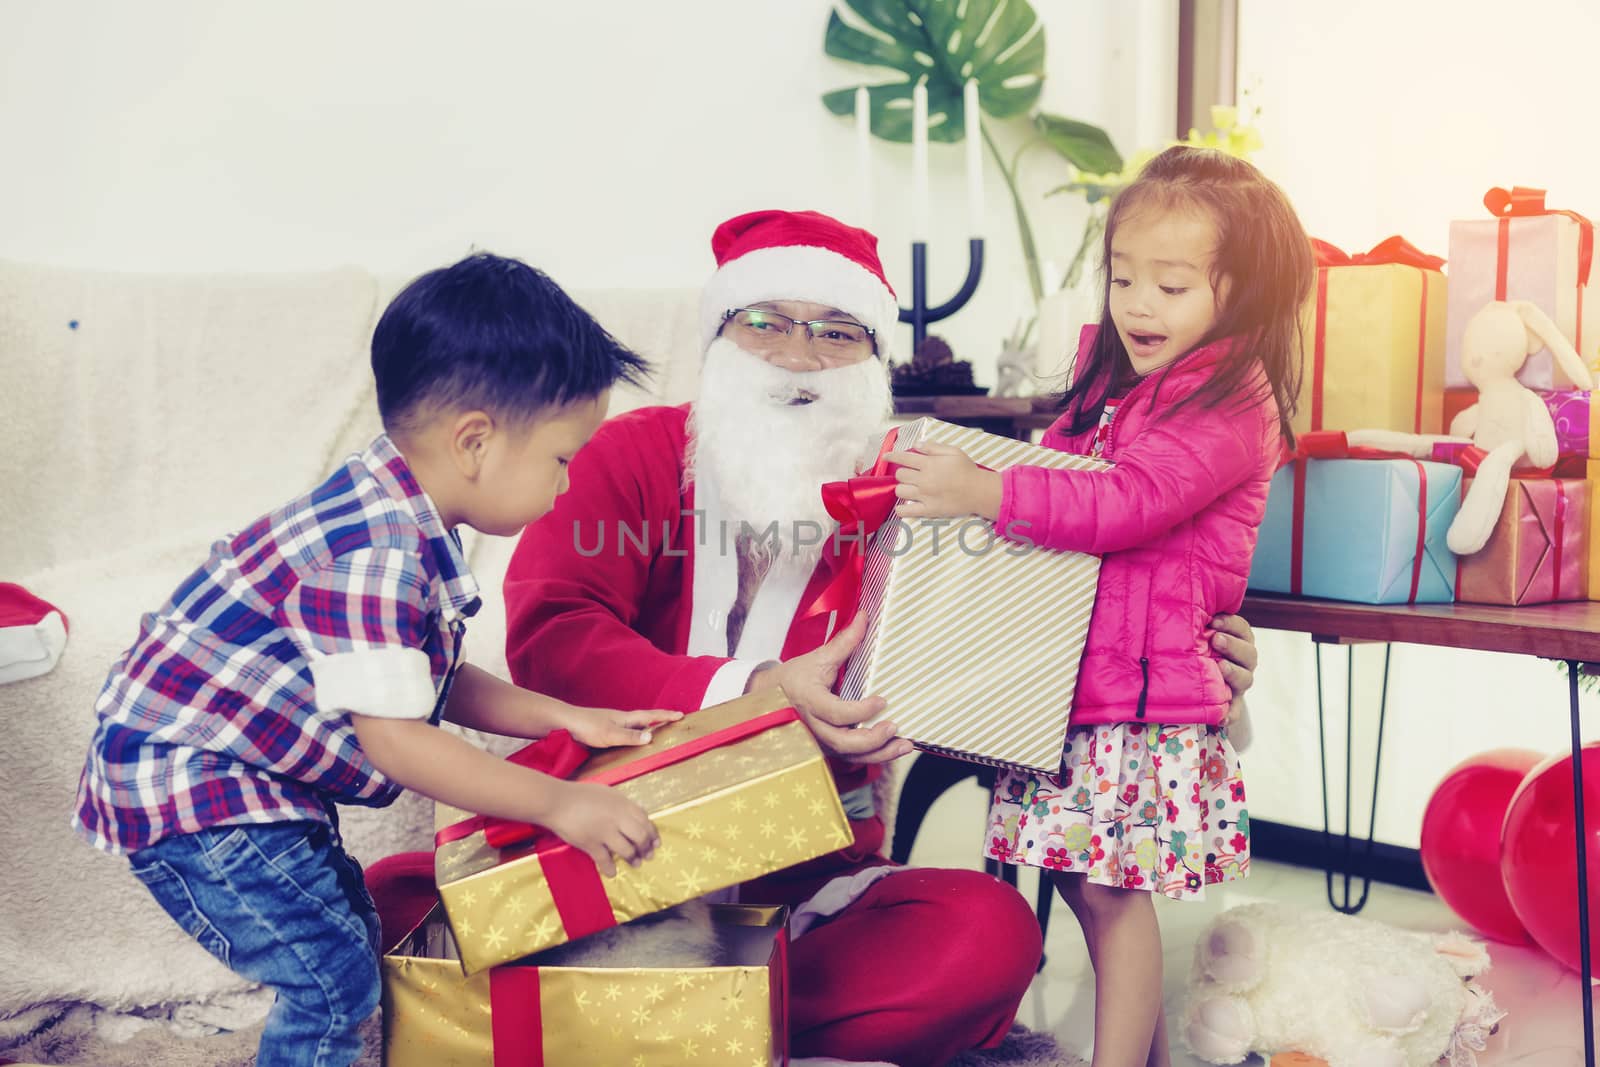 Santa Claus gives gifts to girls and boys during the Christmas season.